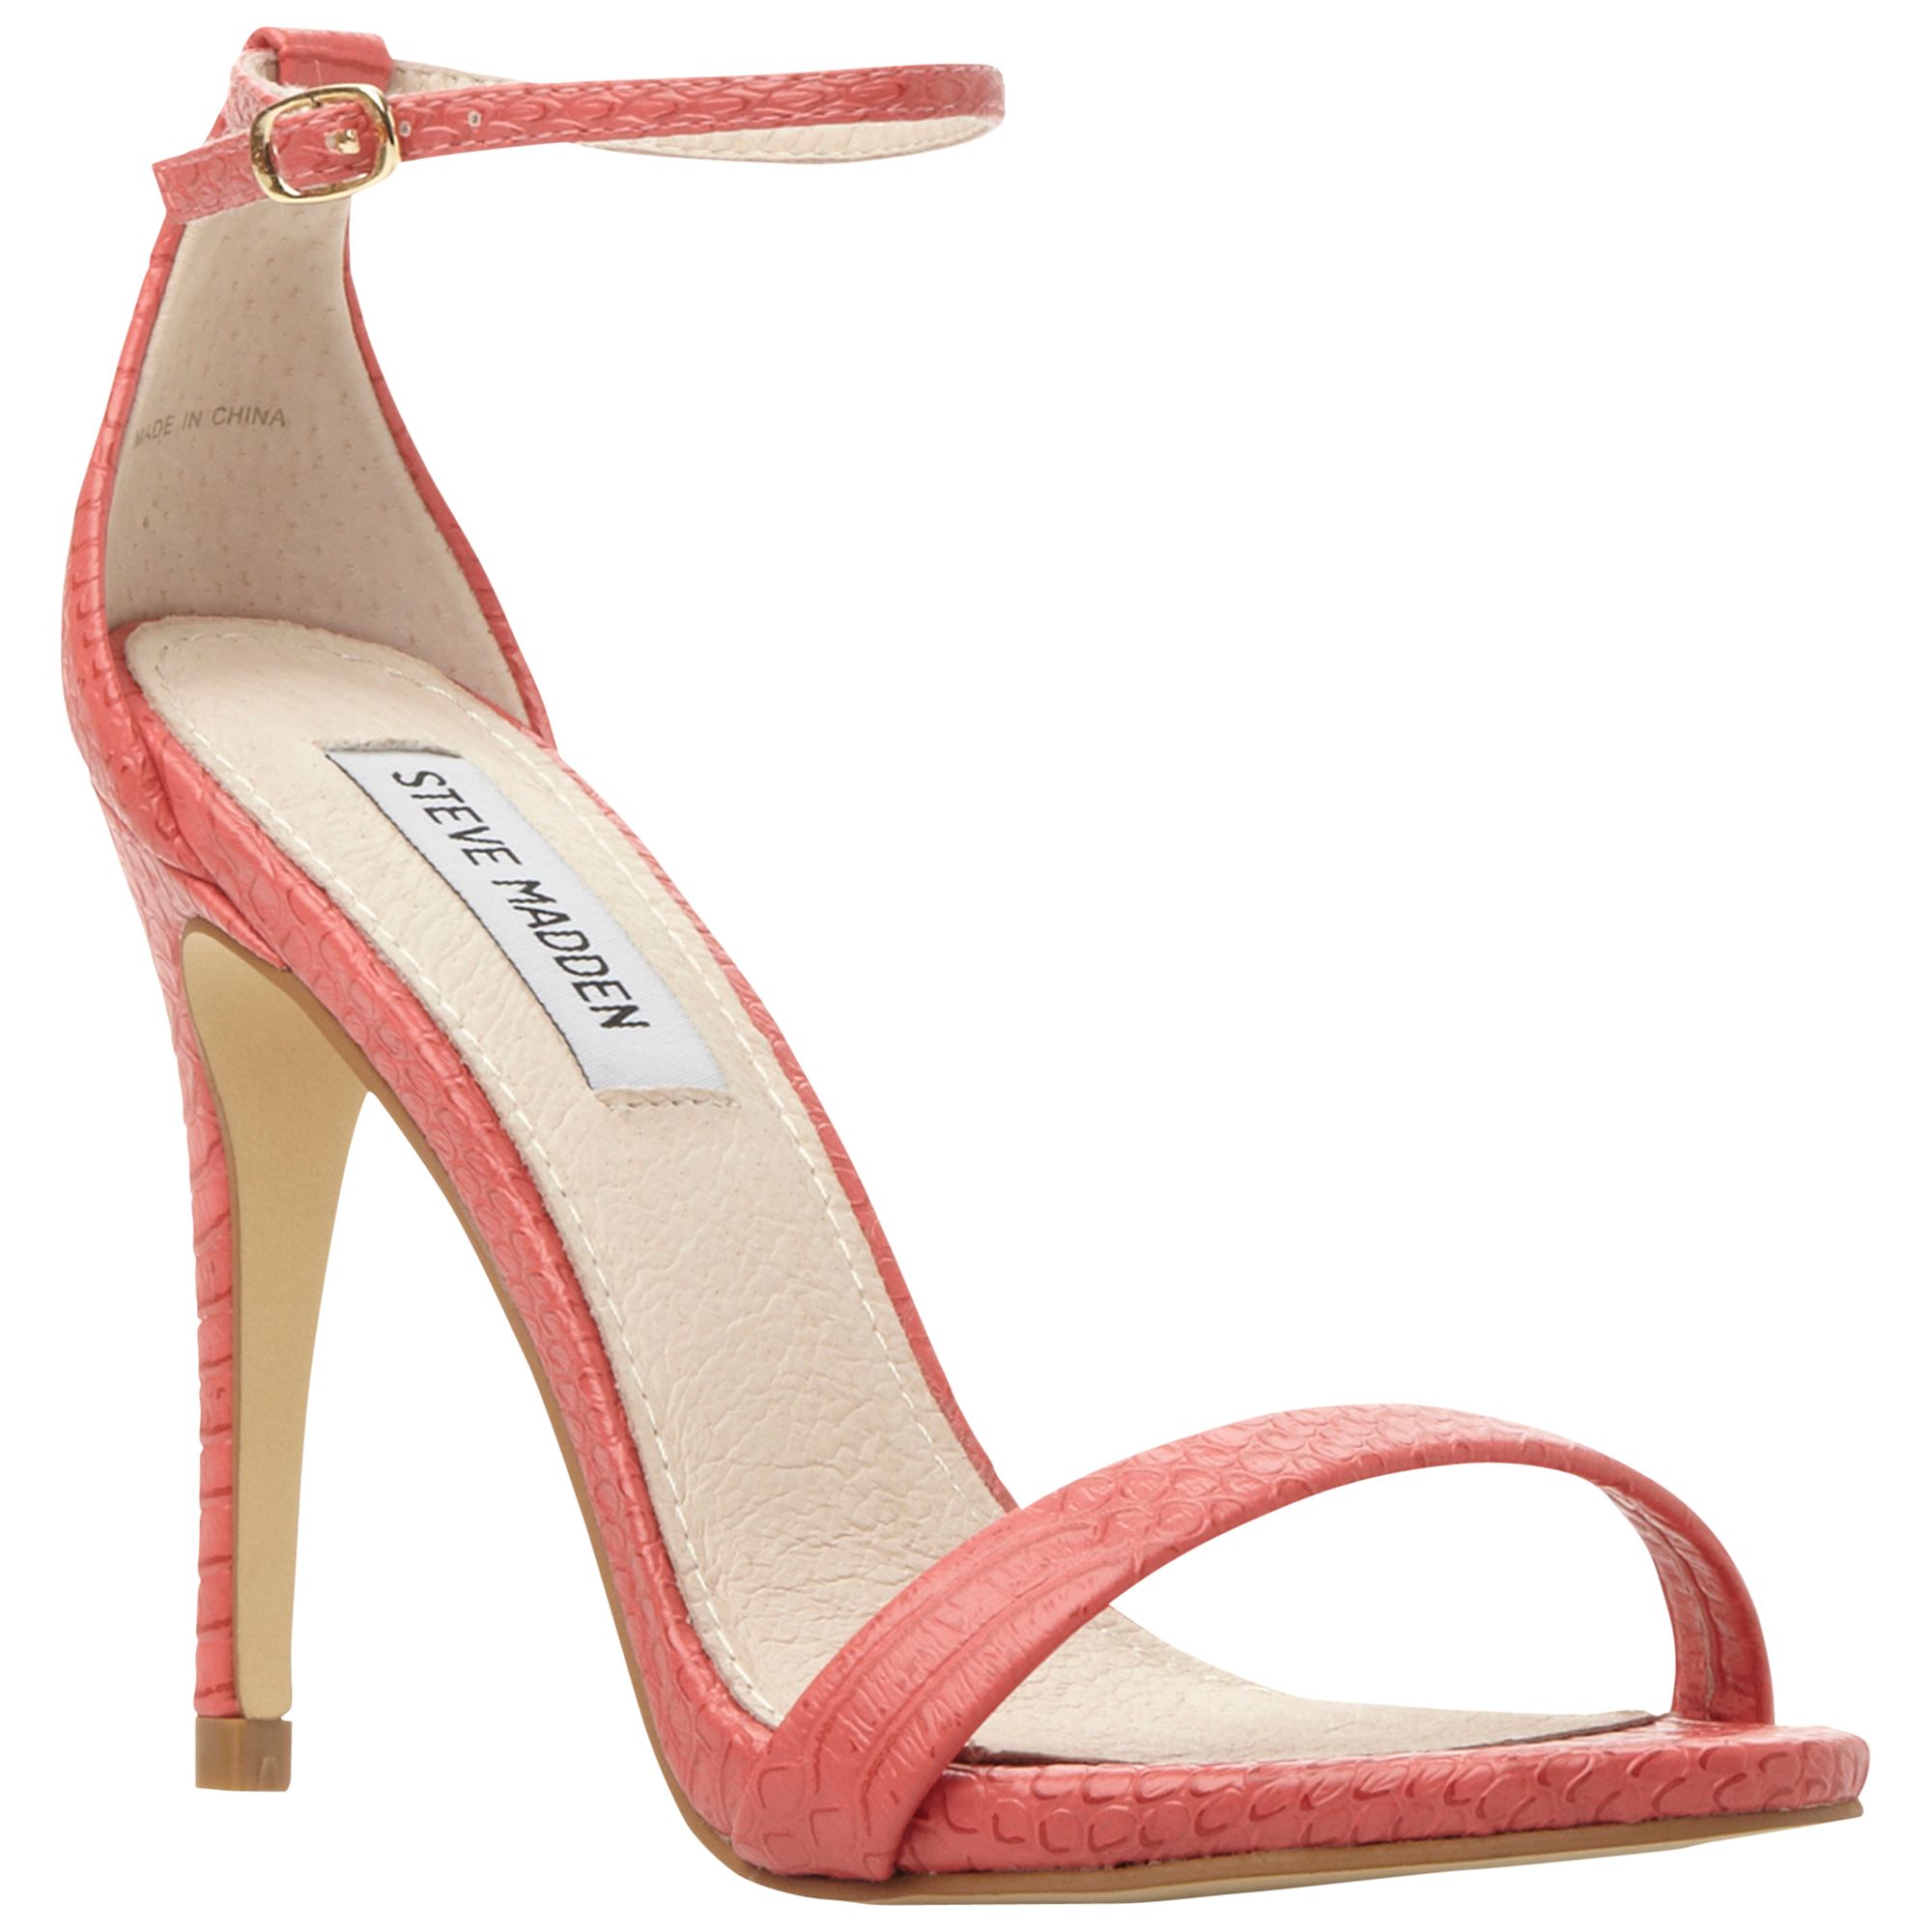 Steve Madden Stecy-R SM Barely There High Heeled Sandals